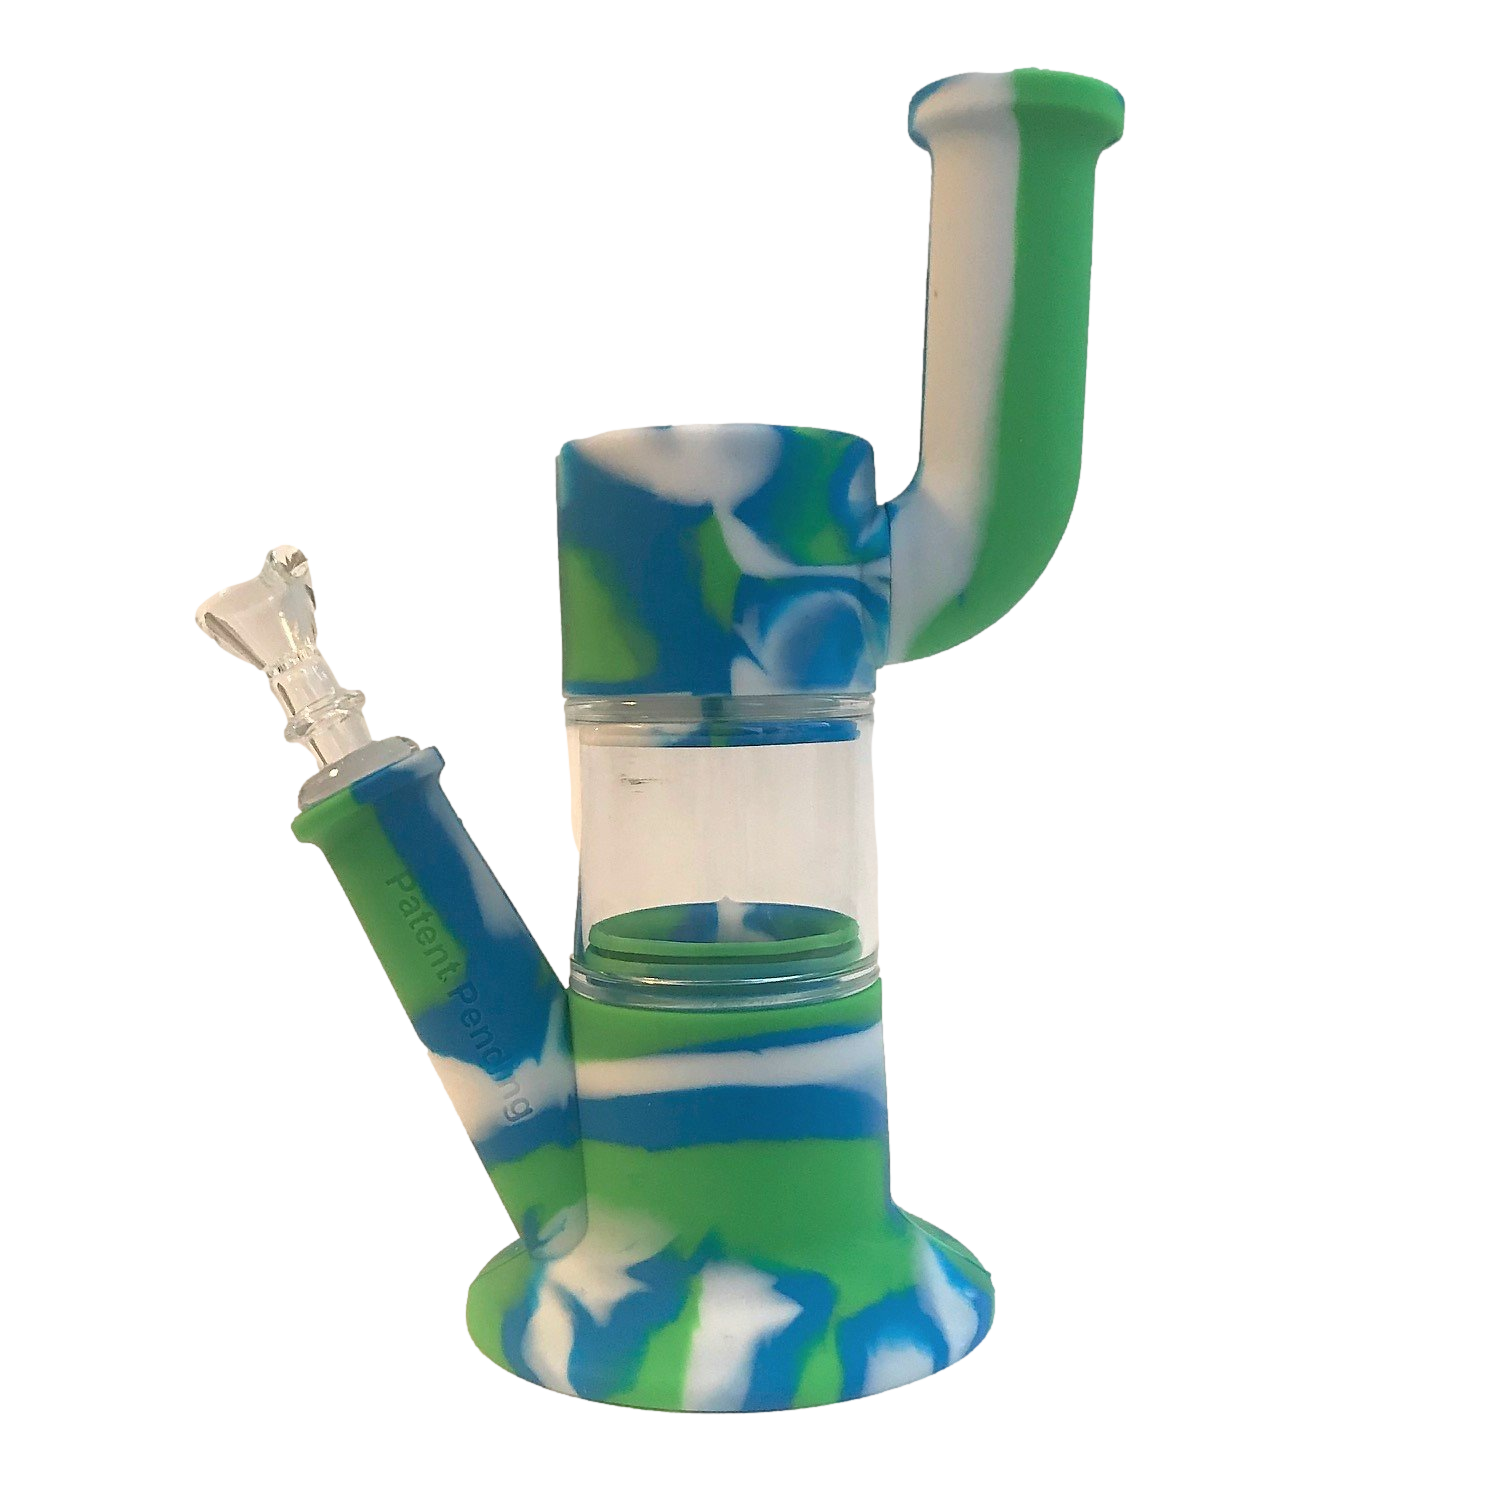 Straw Set / Wax Carving / Dab Tool Kit - Mr. Purple - Glass Water Pipes,  Bongs, RAW Cones/Papers, And Much More